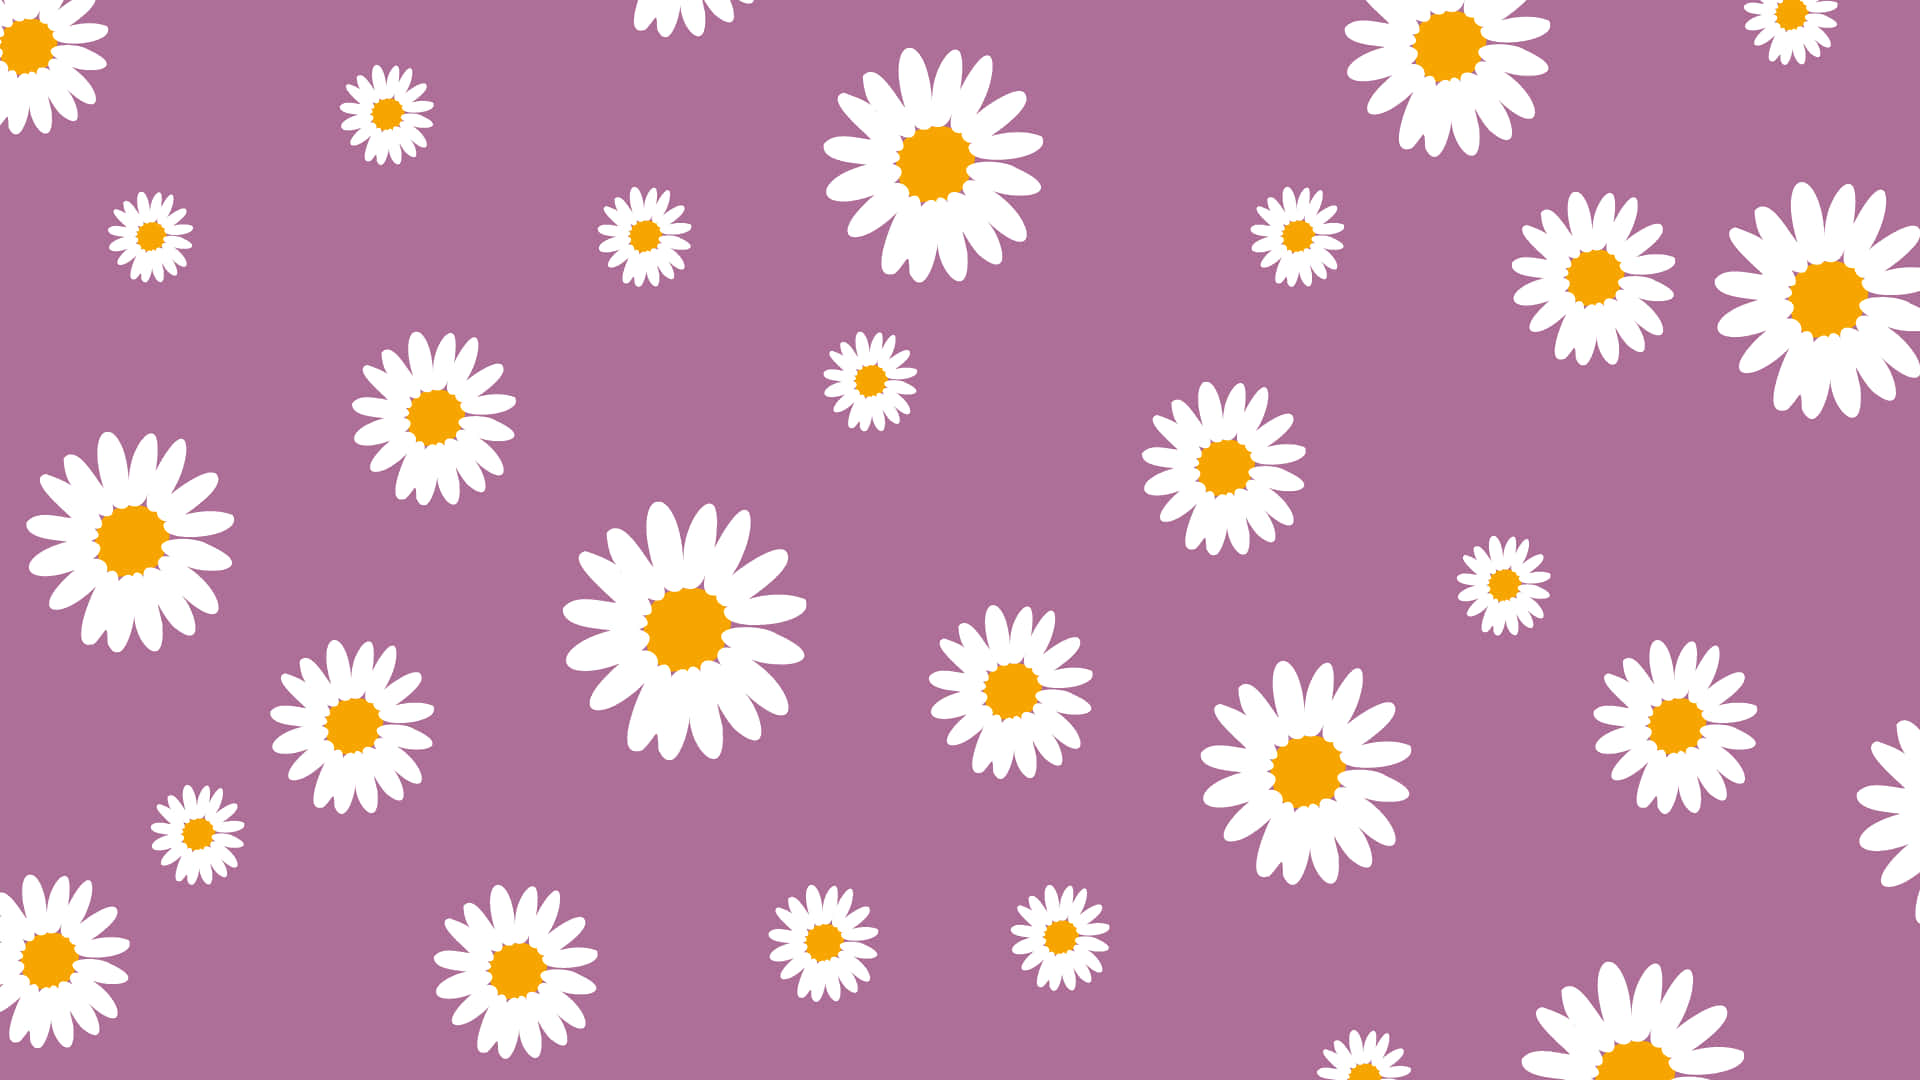 Small Daisies Covering A Pretty Purple Surface Background